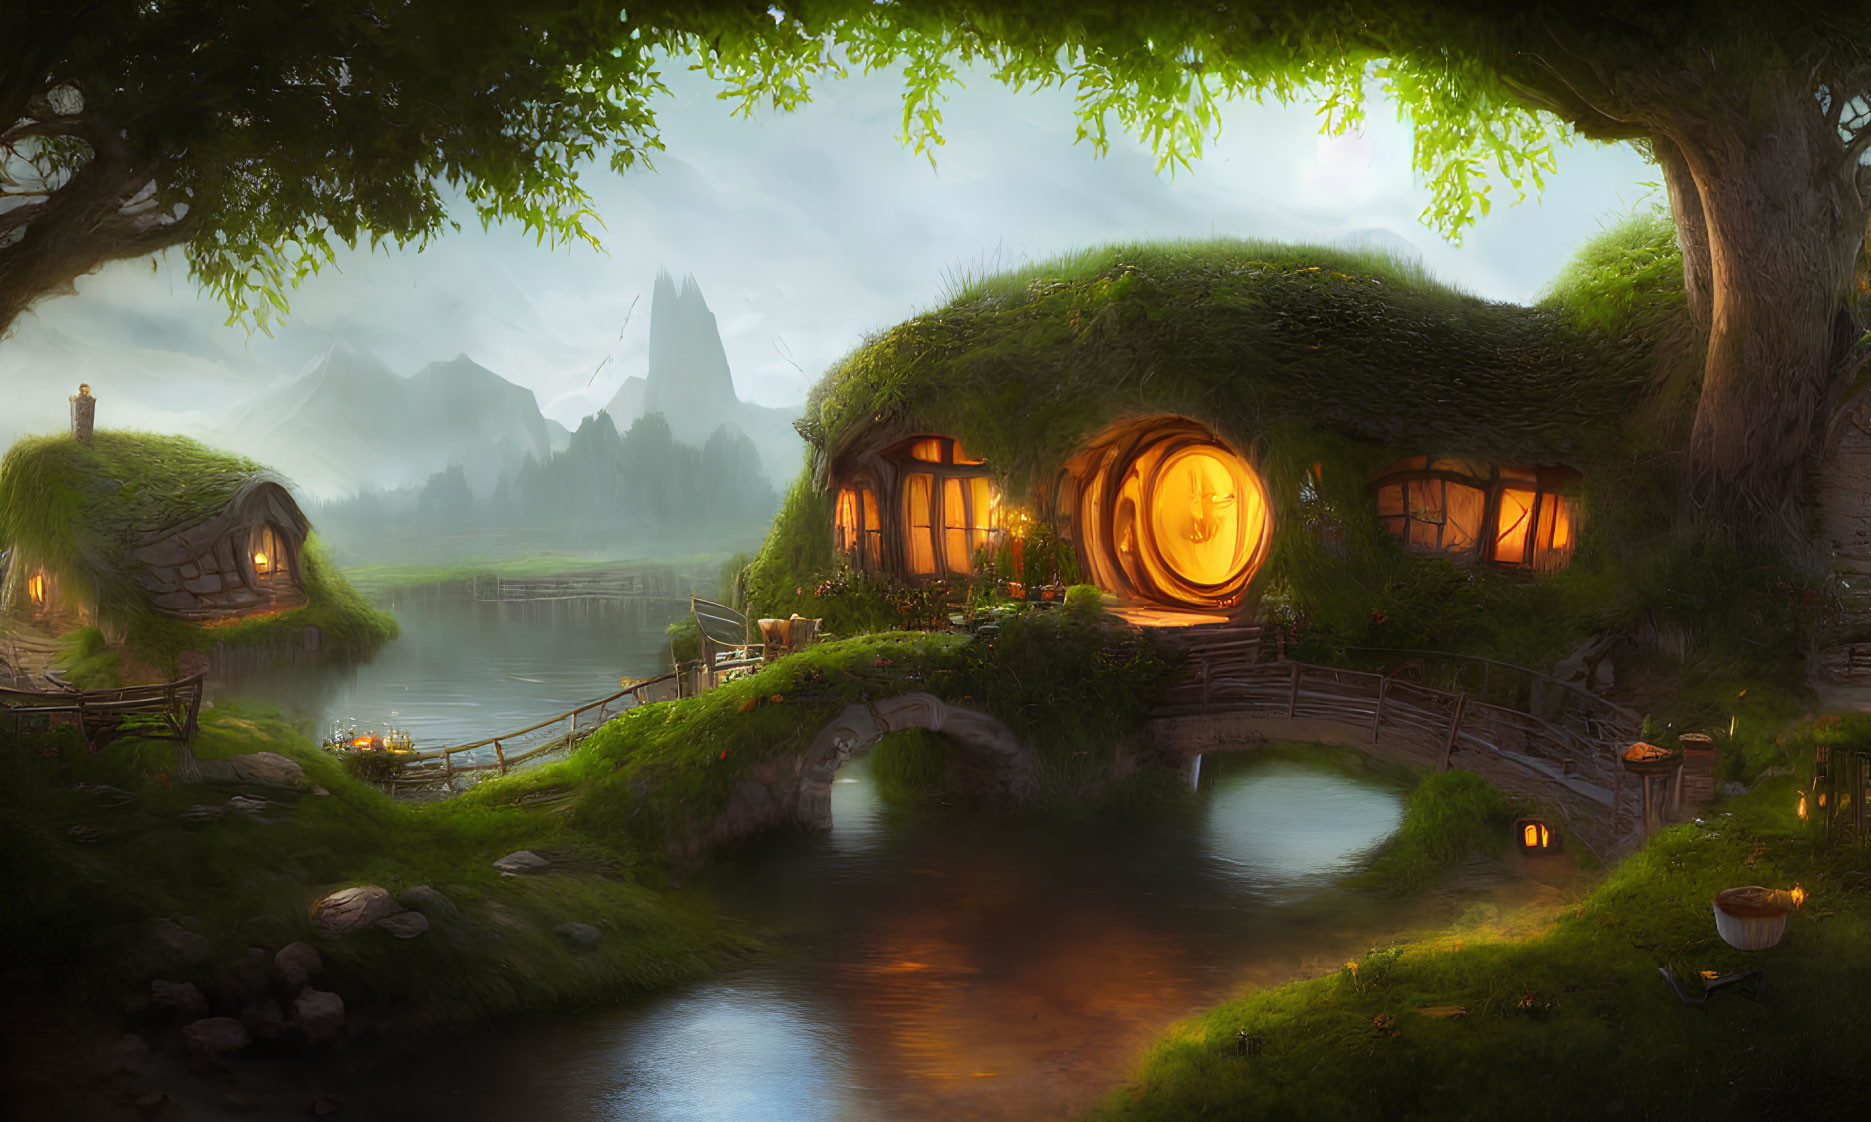 Tranquil fantasy landscape with hobbit-style house by river at dusk